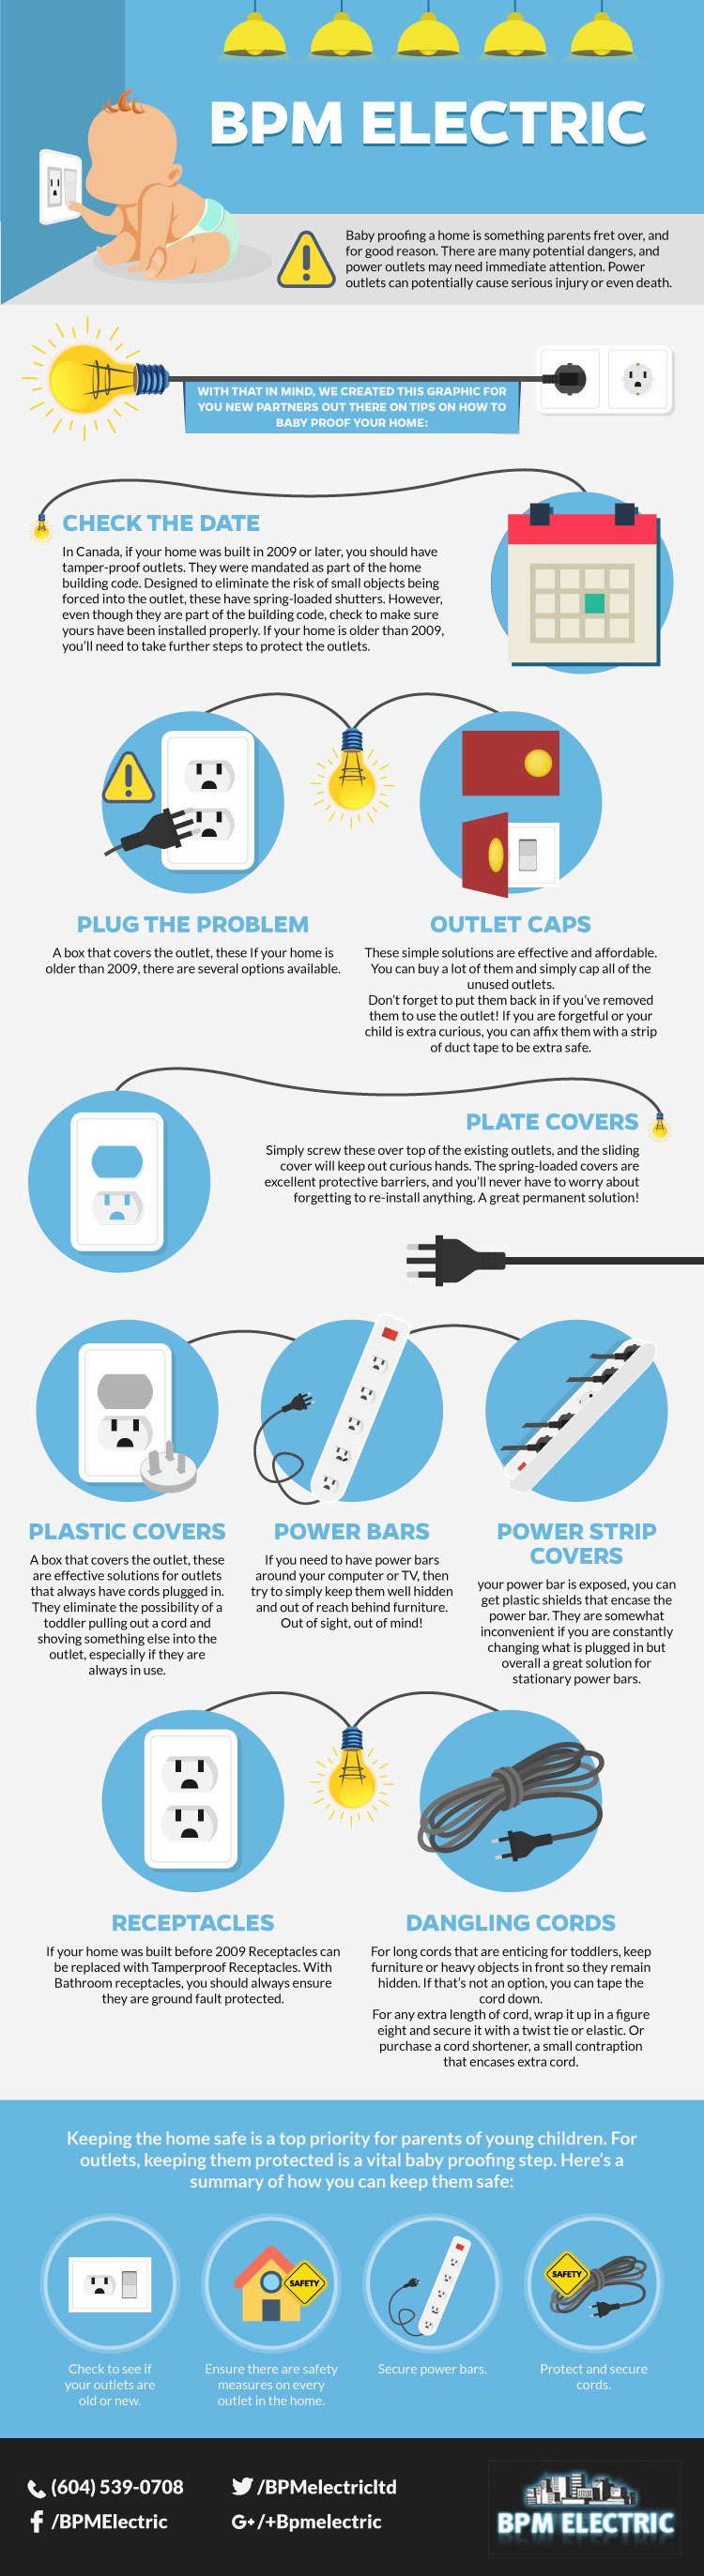 Electrical Safety Tips For Babies